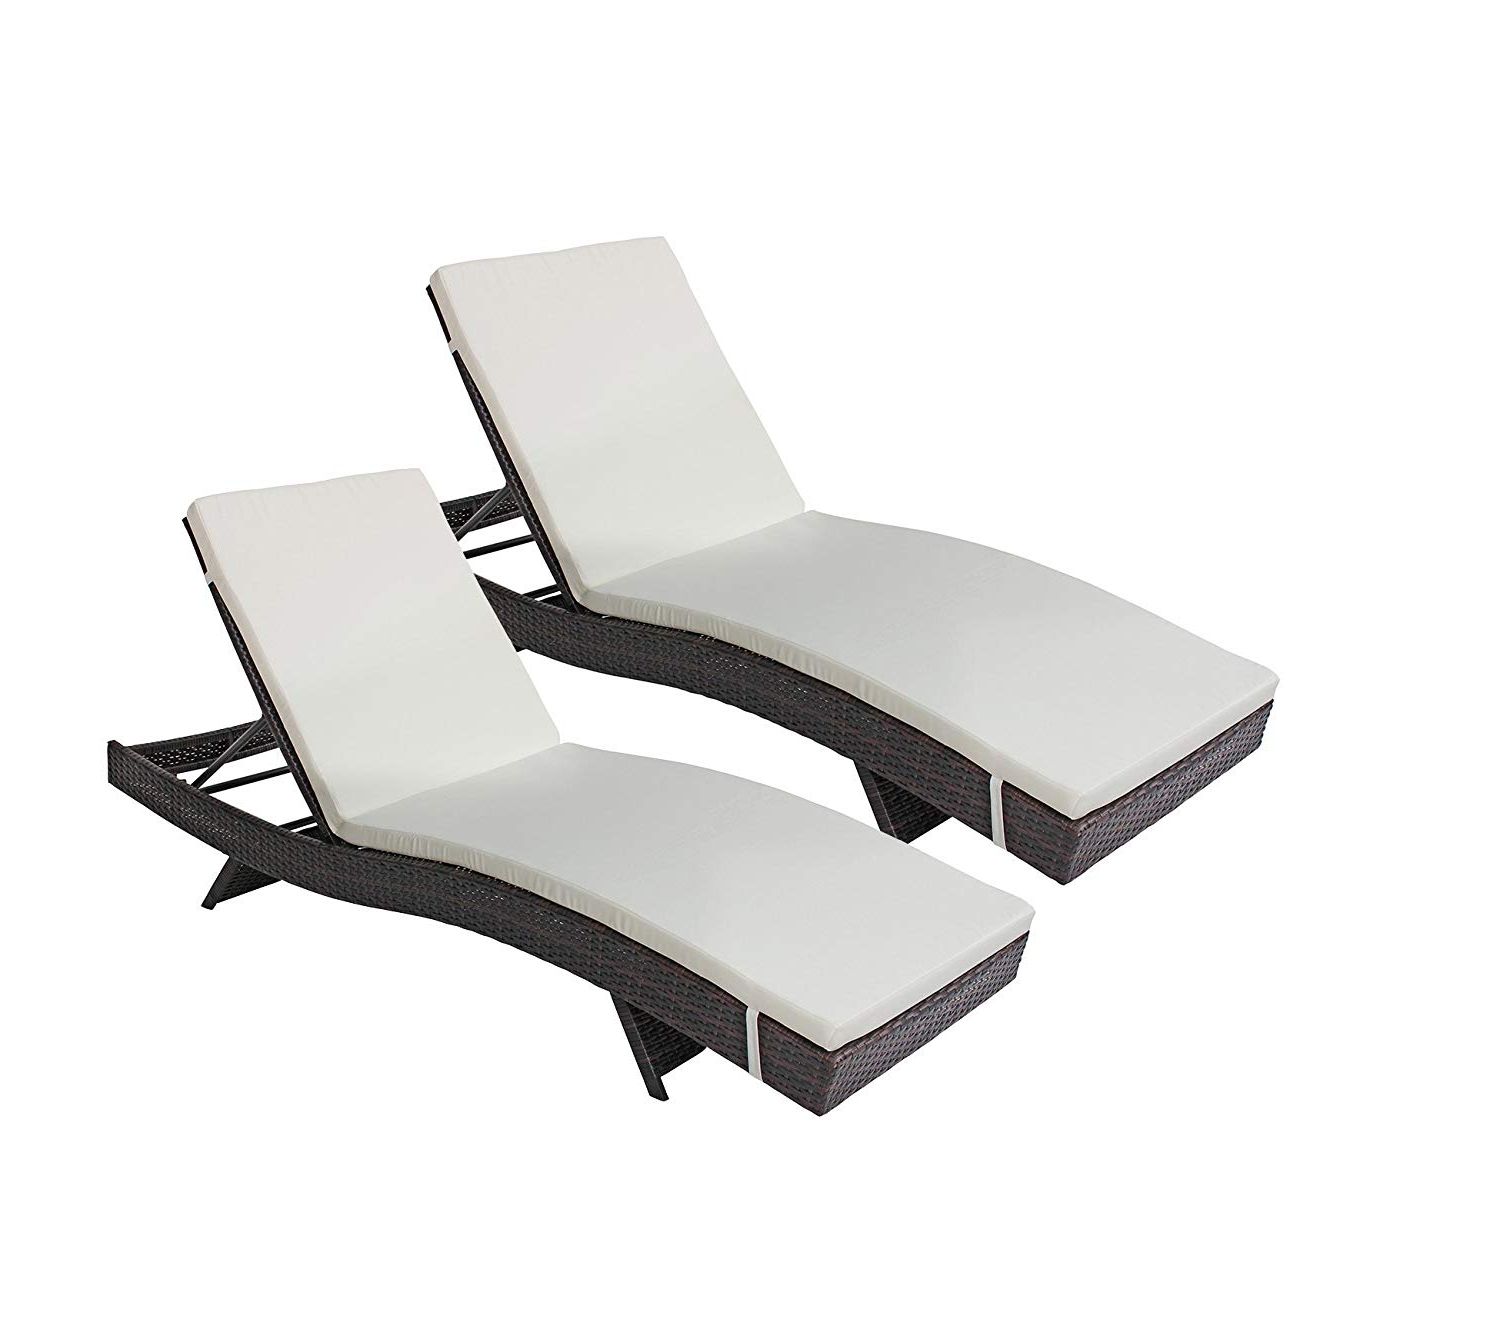 Standard Size Chaise Lounge Chairs With Favorite Grosartig Modern Outdoor Chaise Lounge Chair E Eames Cool (View 11 of 25)